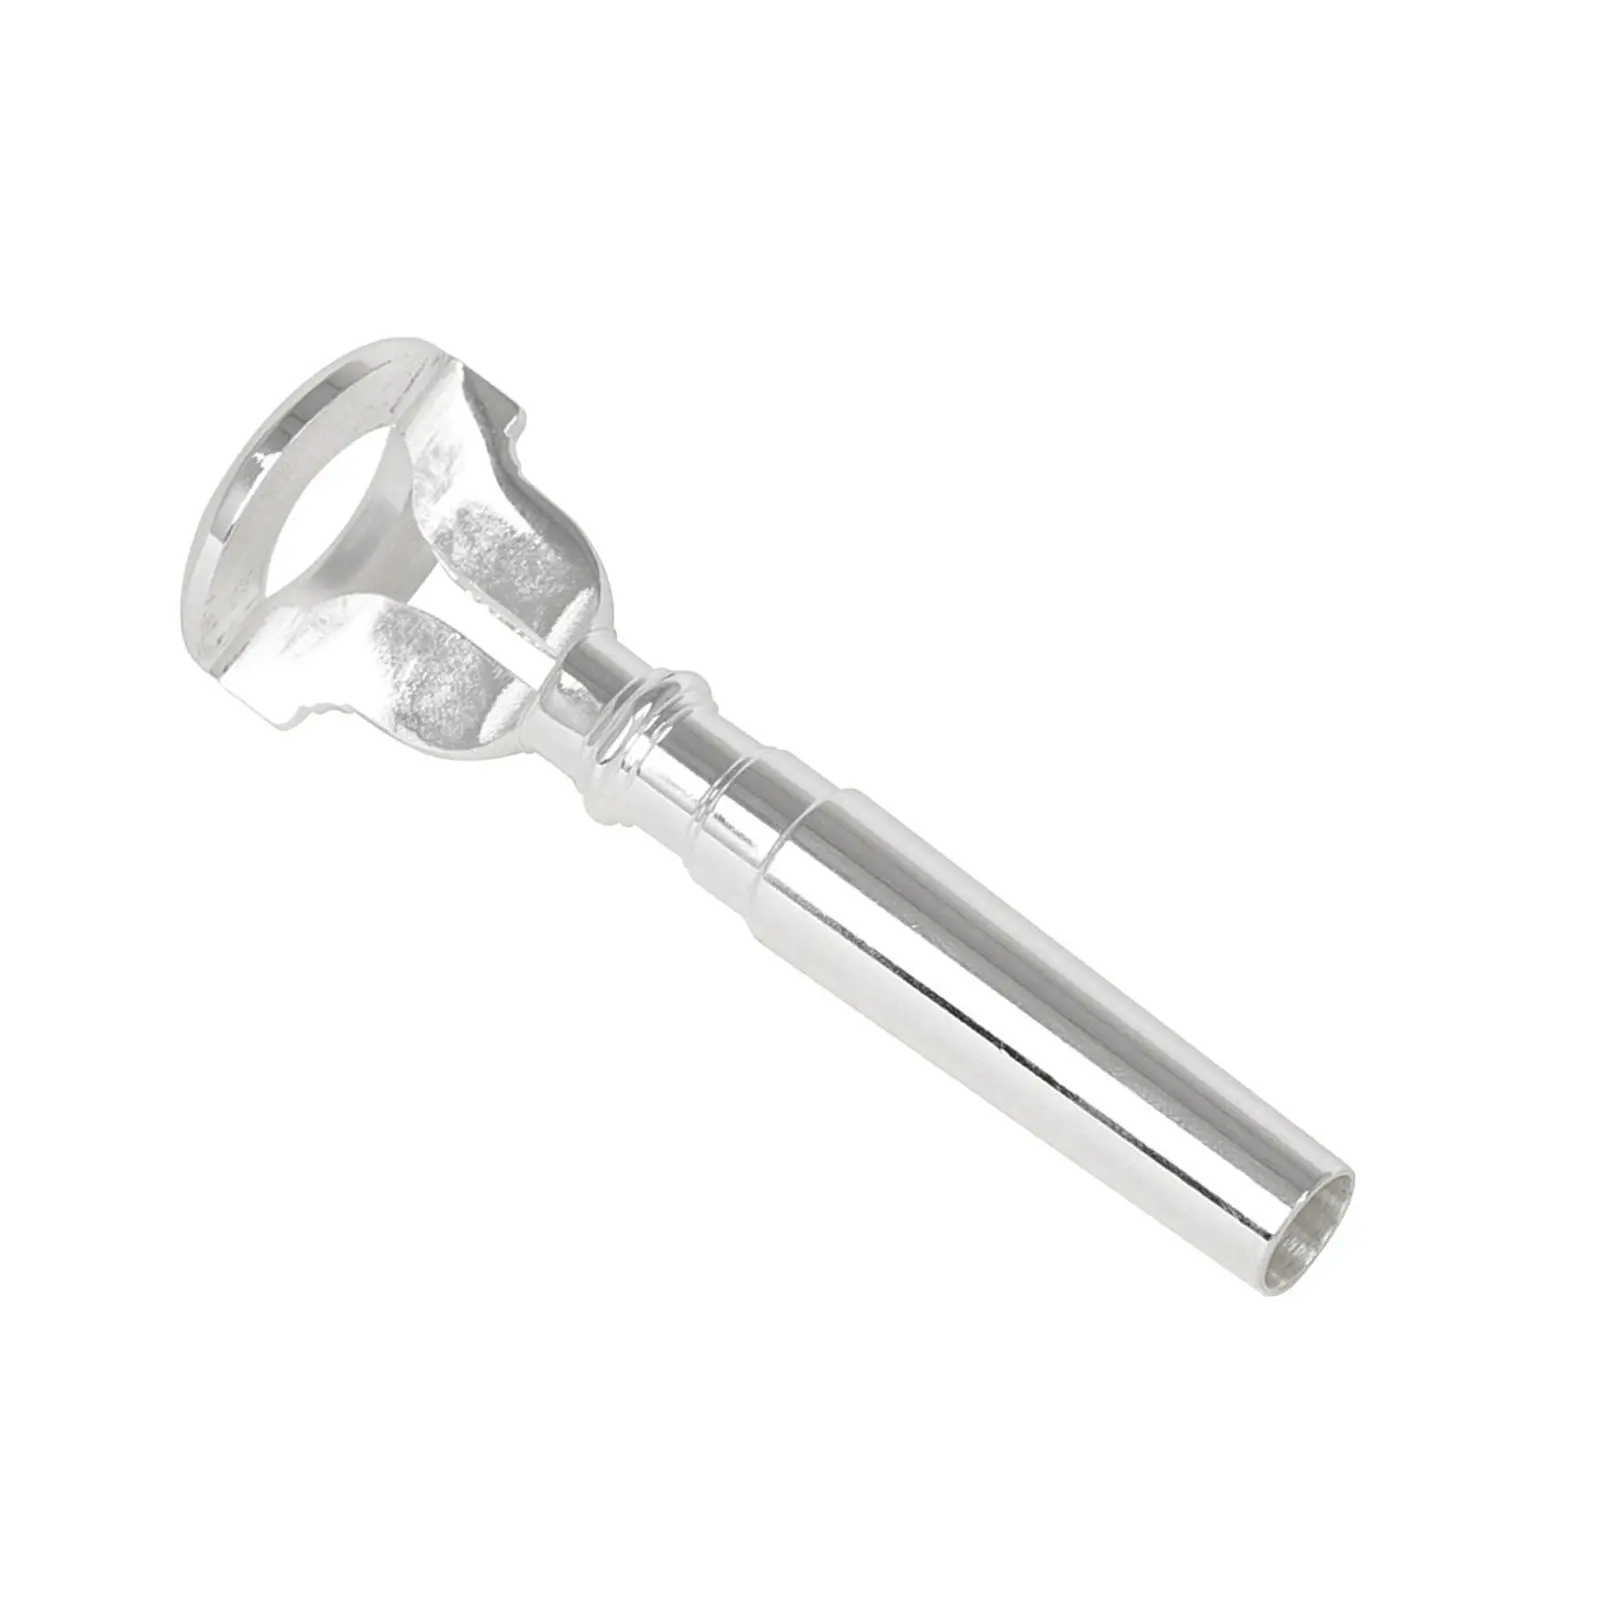 Mouth Trainer Mouthpiece Accessory Profesional For Trombone